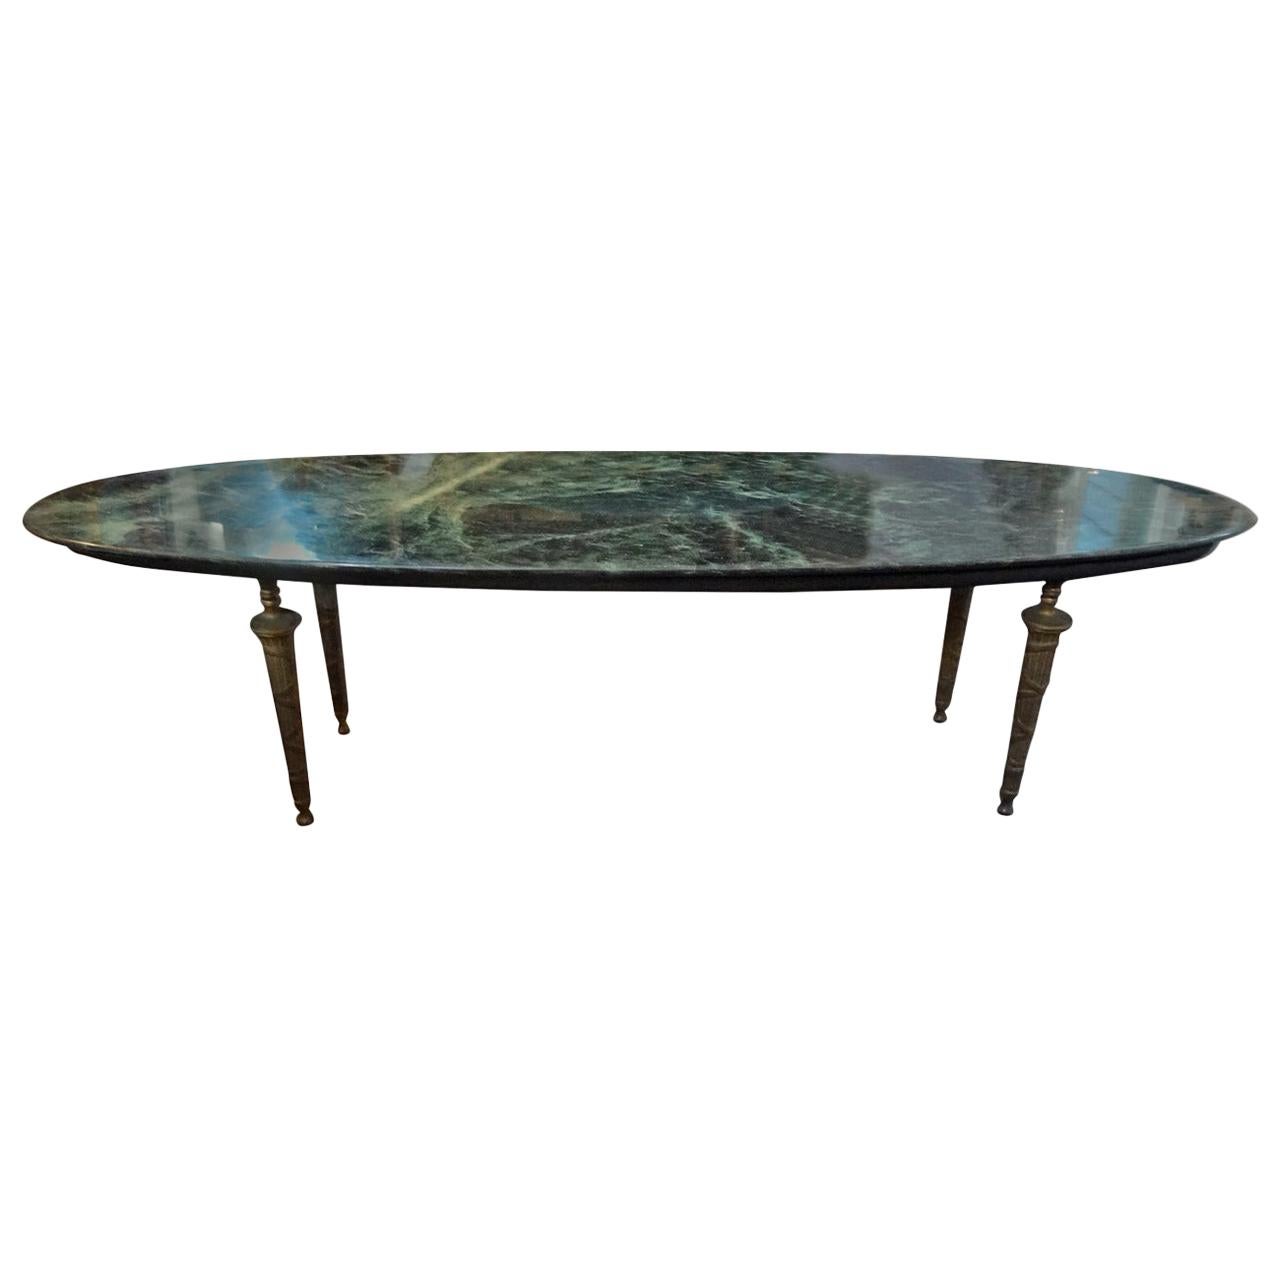 Italian Gio Ponti Inspired Neoclassical Bronze and Marble Cocktail Table